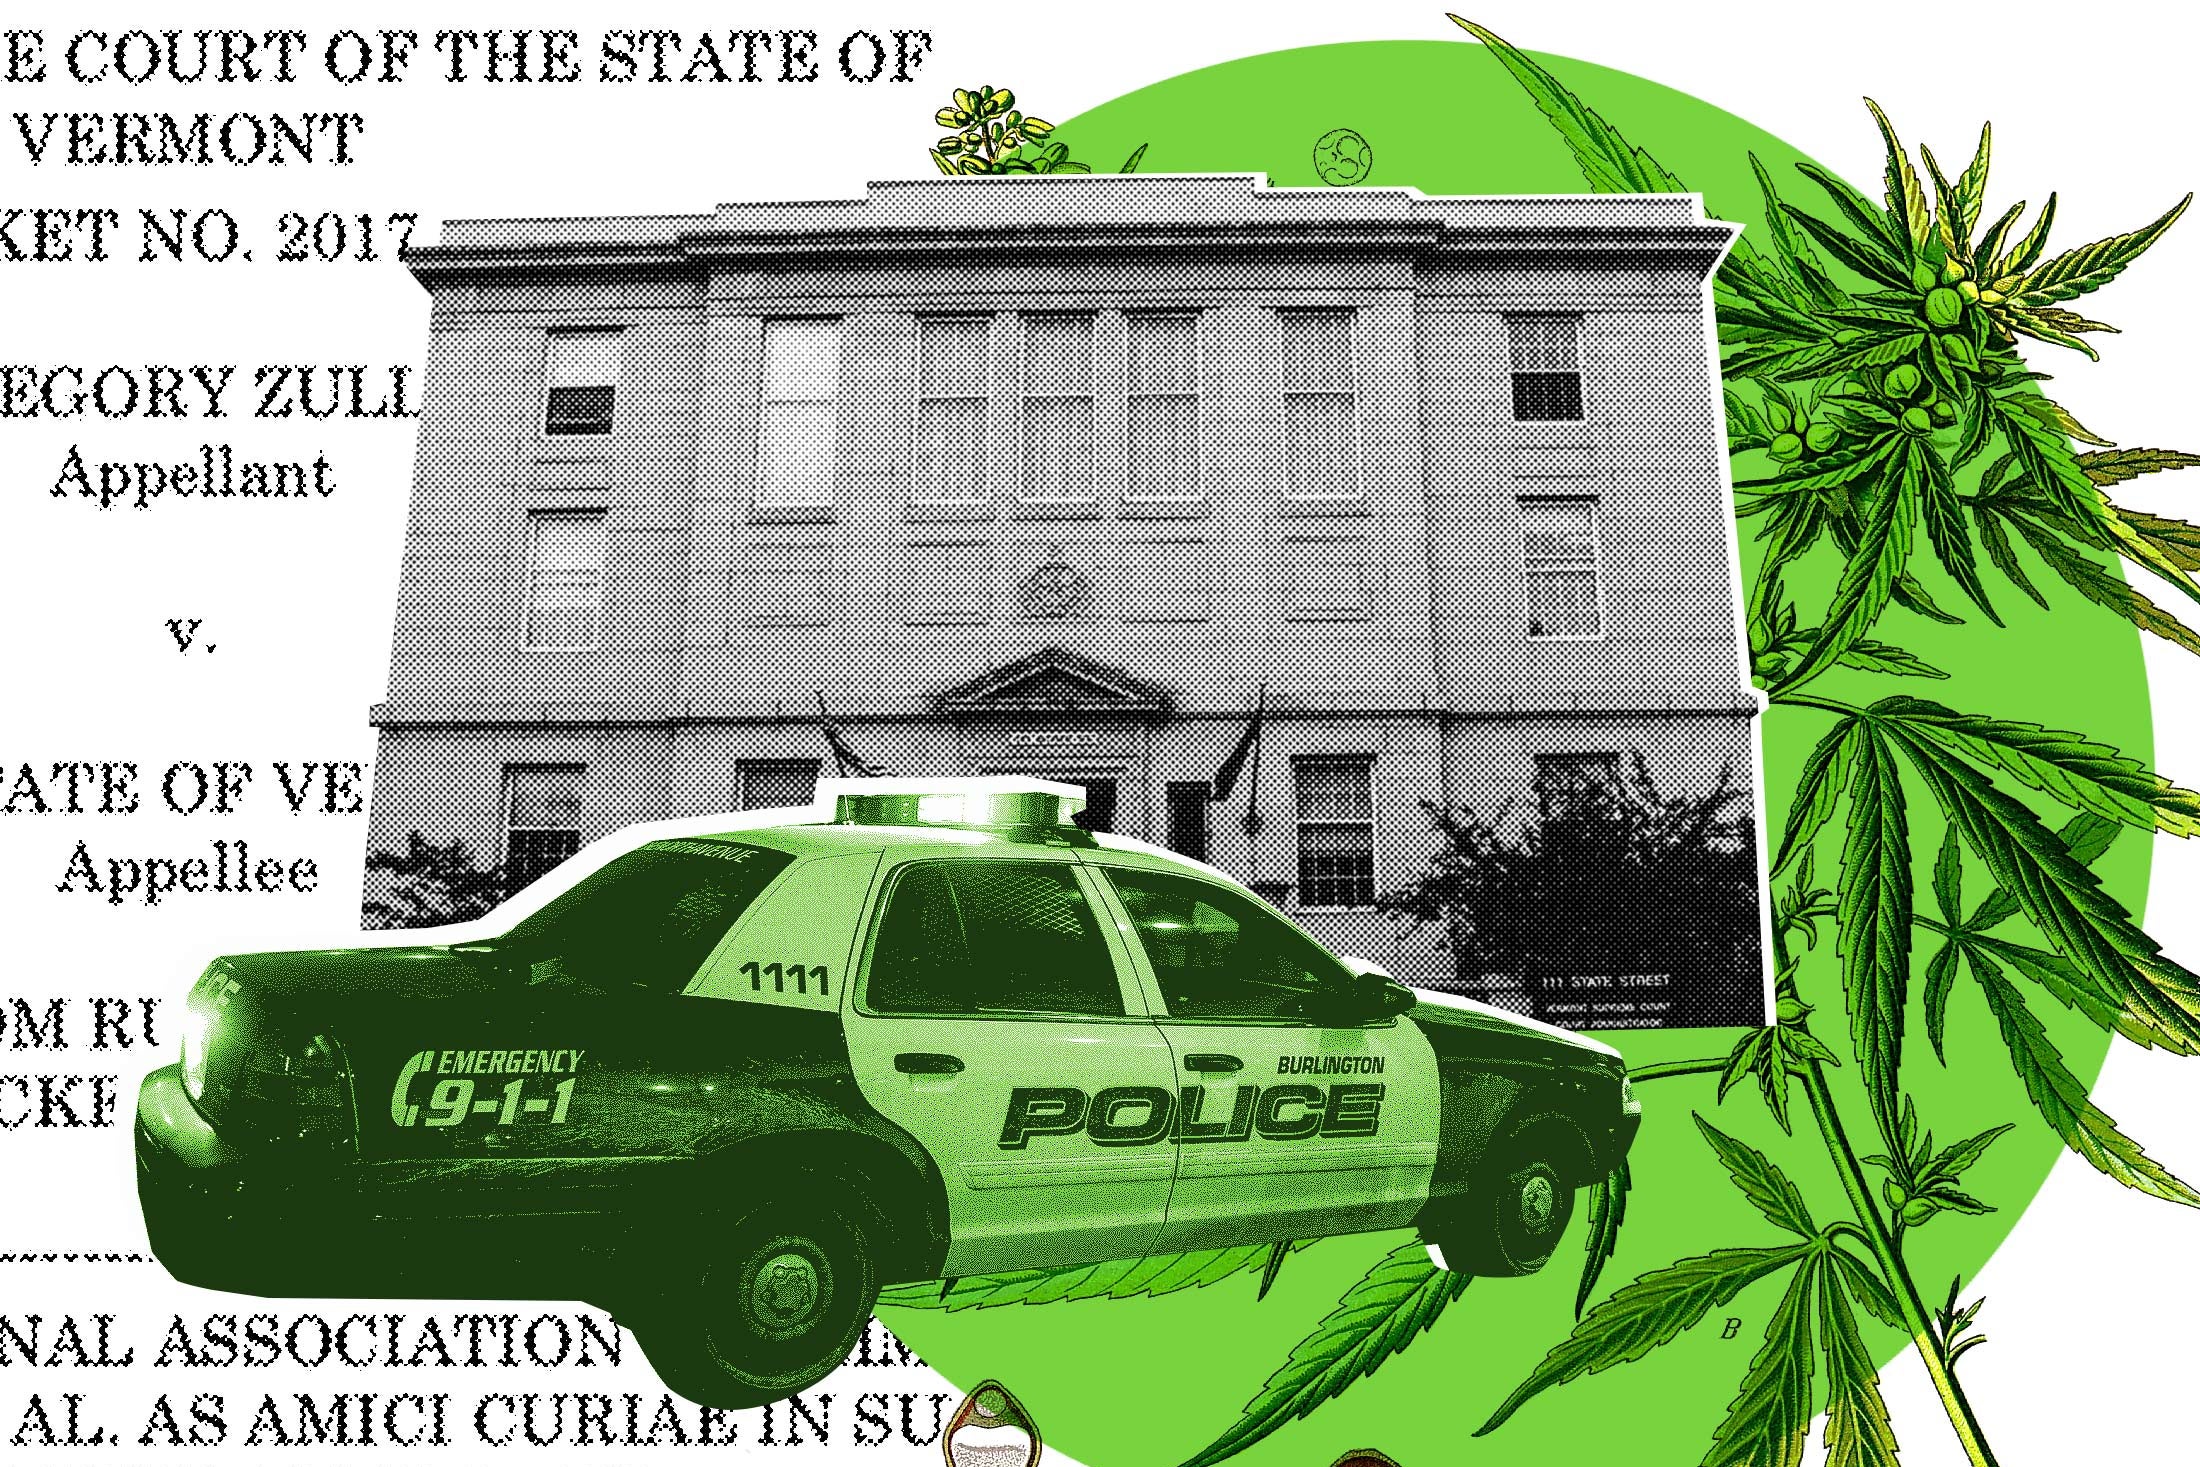 Photo illustration of a Burlington police car, an image from the Vermont v. Zullo opinion, marijuana leaves, and the Vermont Supreme Court.